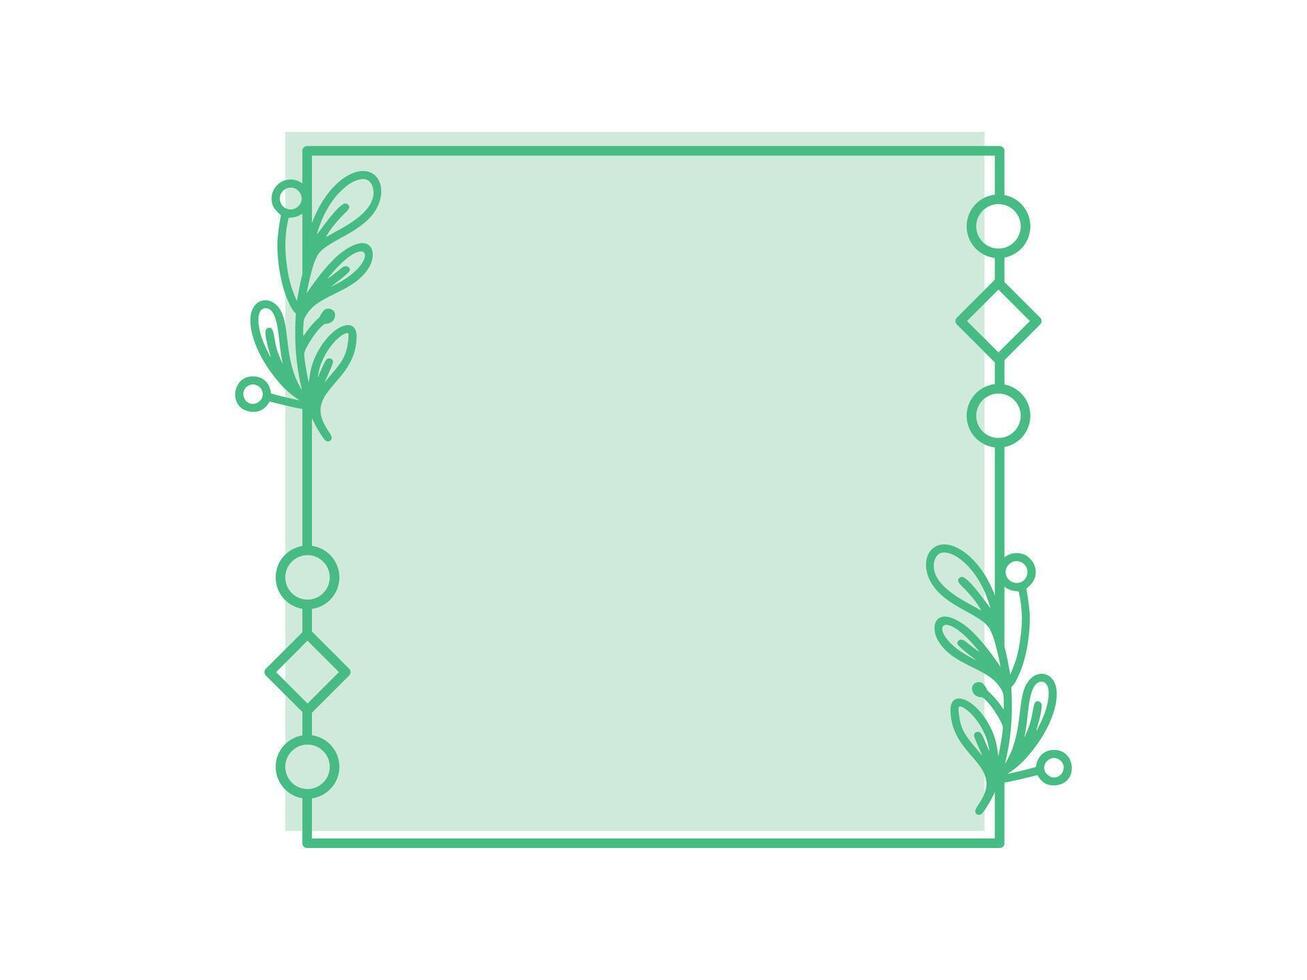 Abstract green with leaf frame shape flat design vector